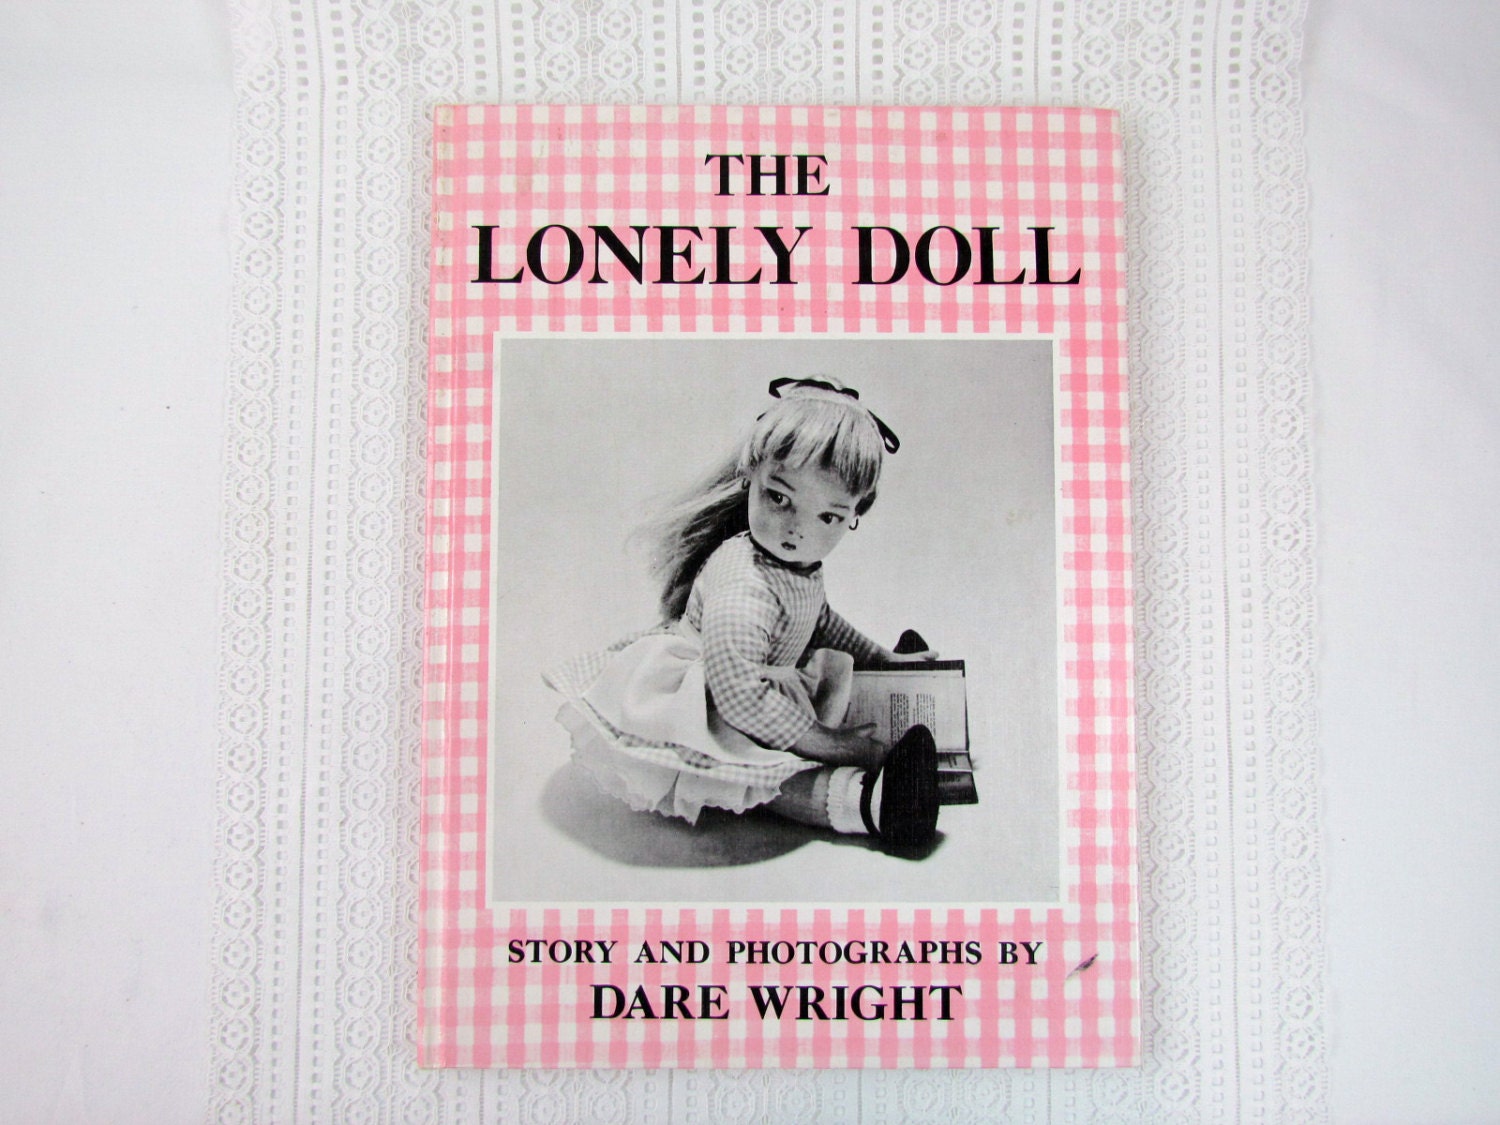 the lonely doll by dare wright